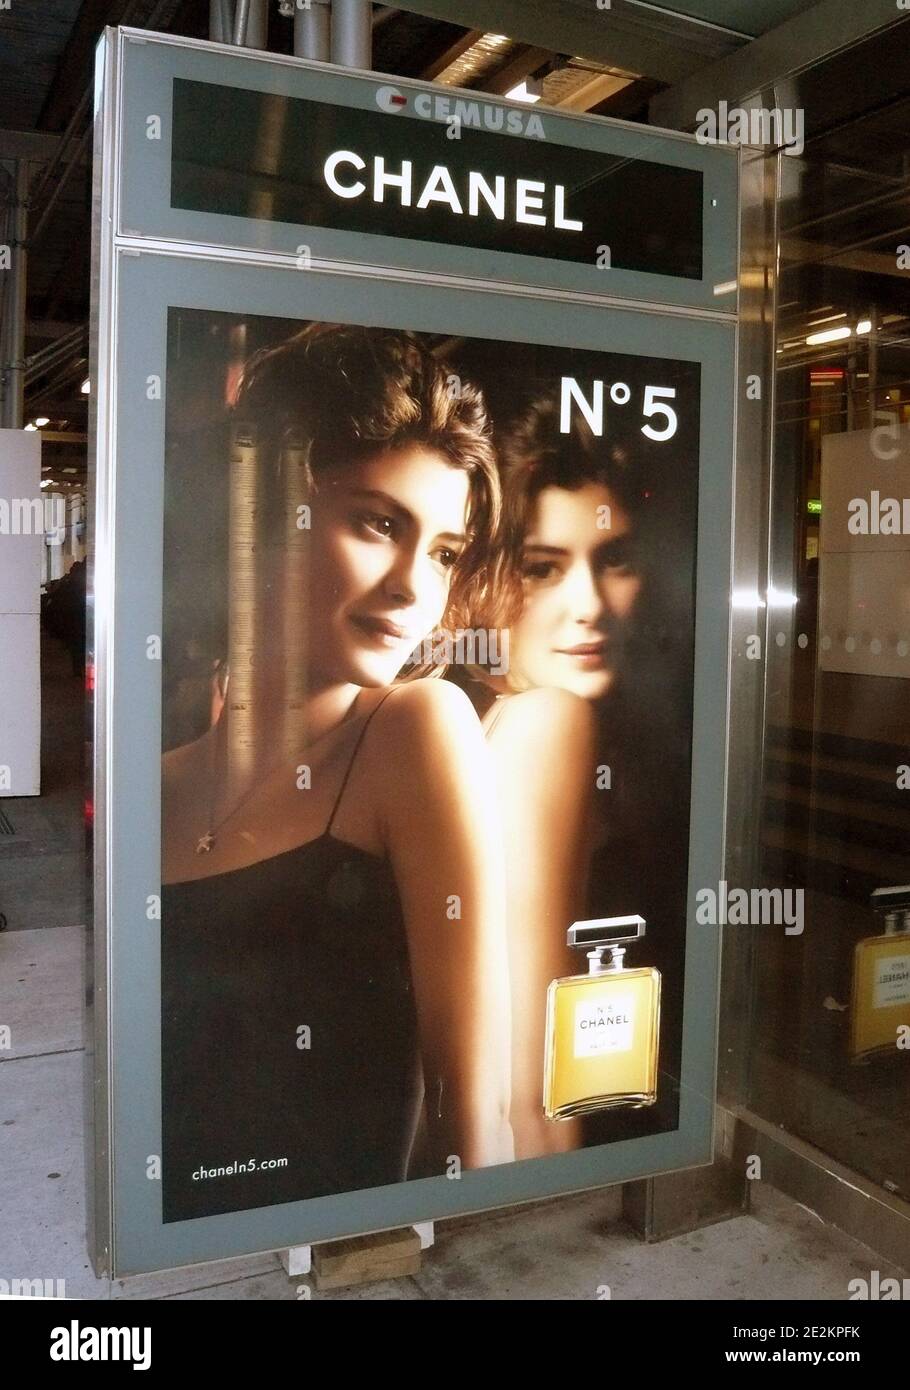 Audrey Tautou the New Chanel No. 5 Girl